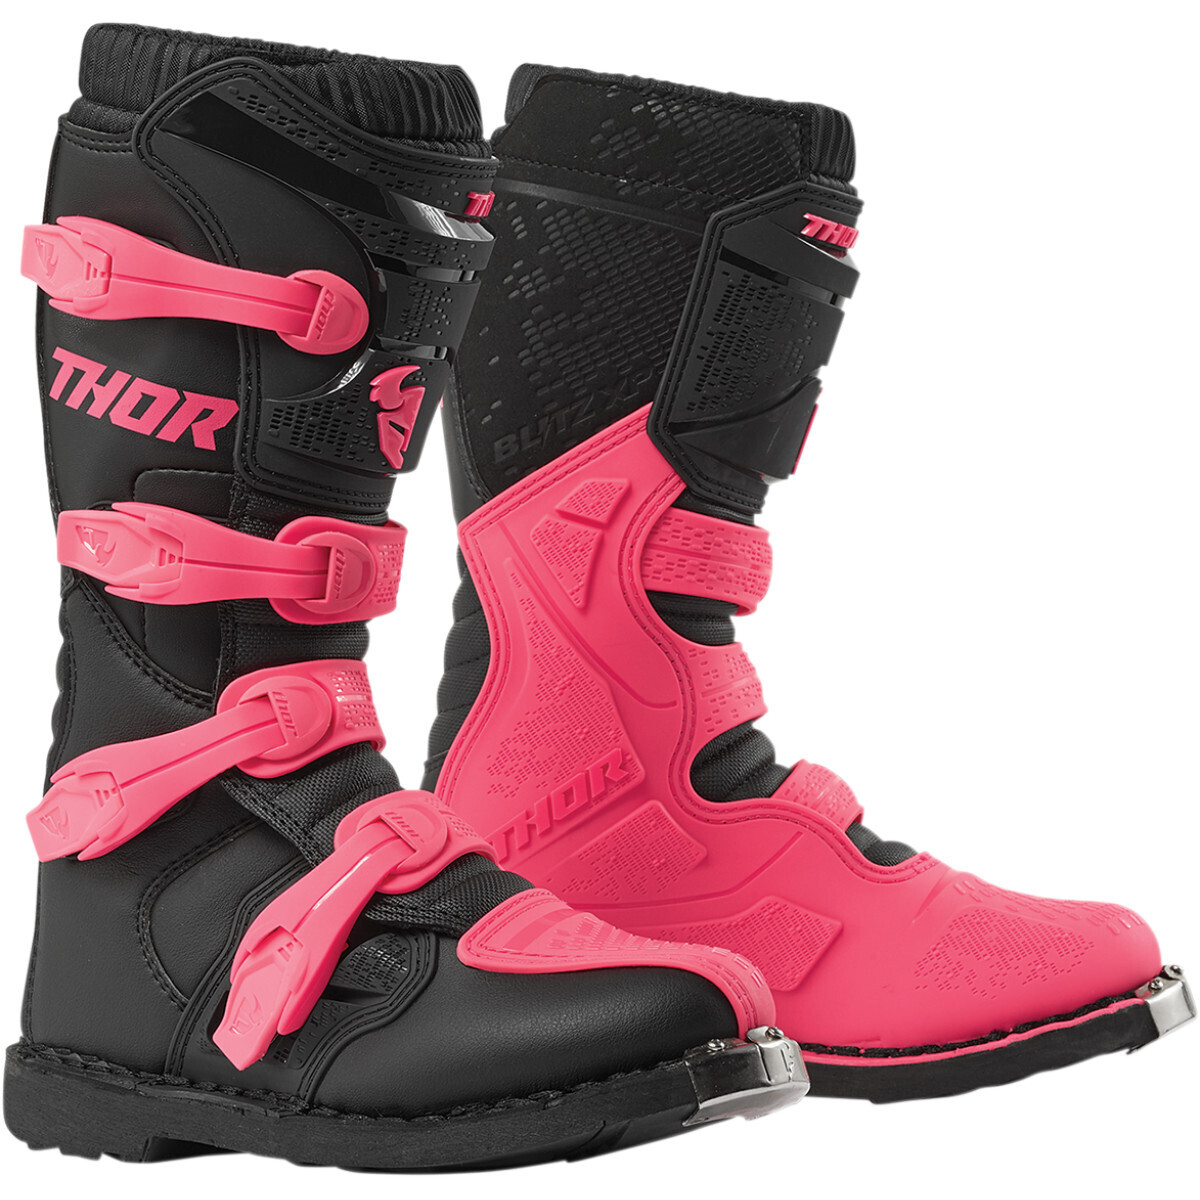 THOR
WOMENS BLITZ XP S9W OFFROAD BOOTS BLACK/PINK